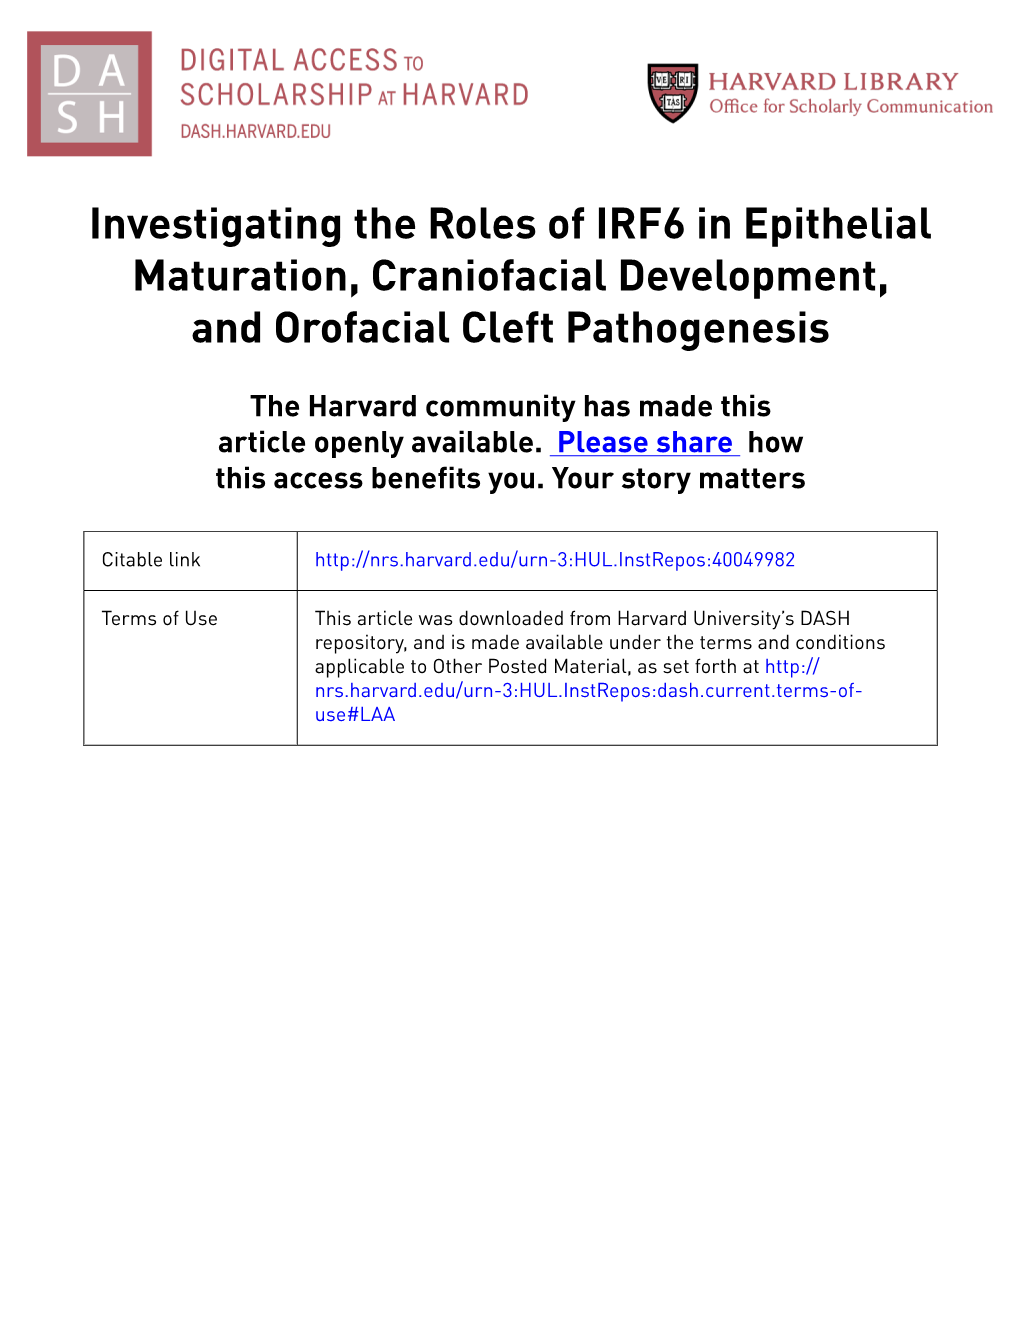 Investigating the Roles of IRF6 in Epithelial Maturation, Craniofacial Development, and Orofacial Cleft Pathogenesis